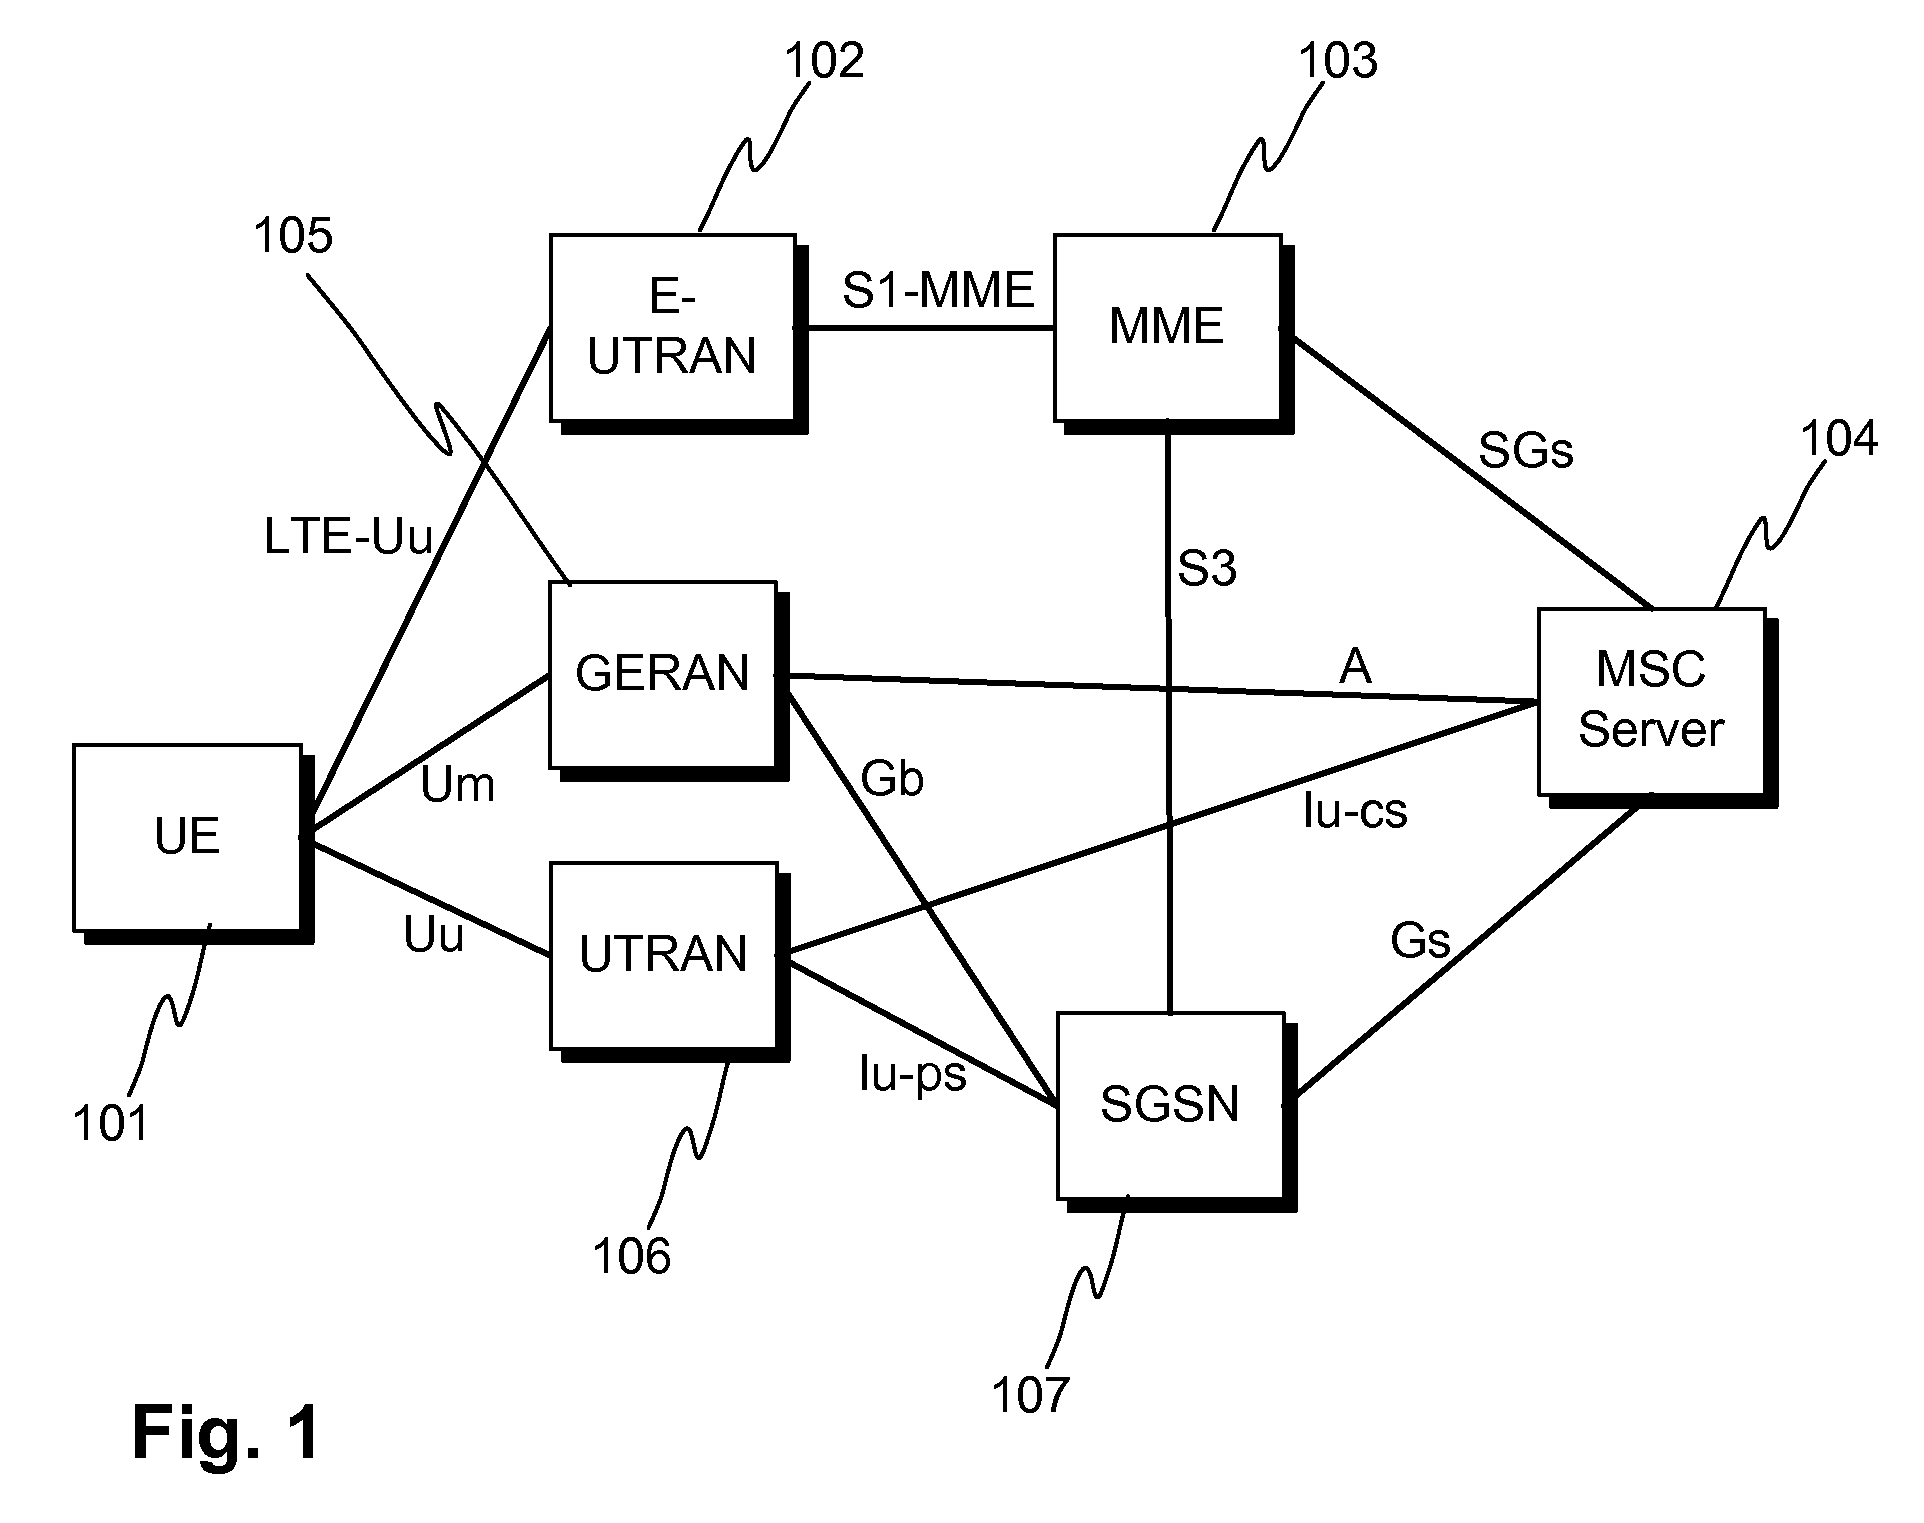 Network selection in a shared network environment